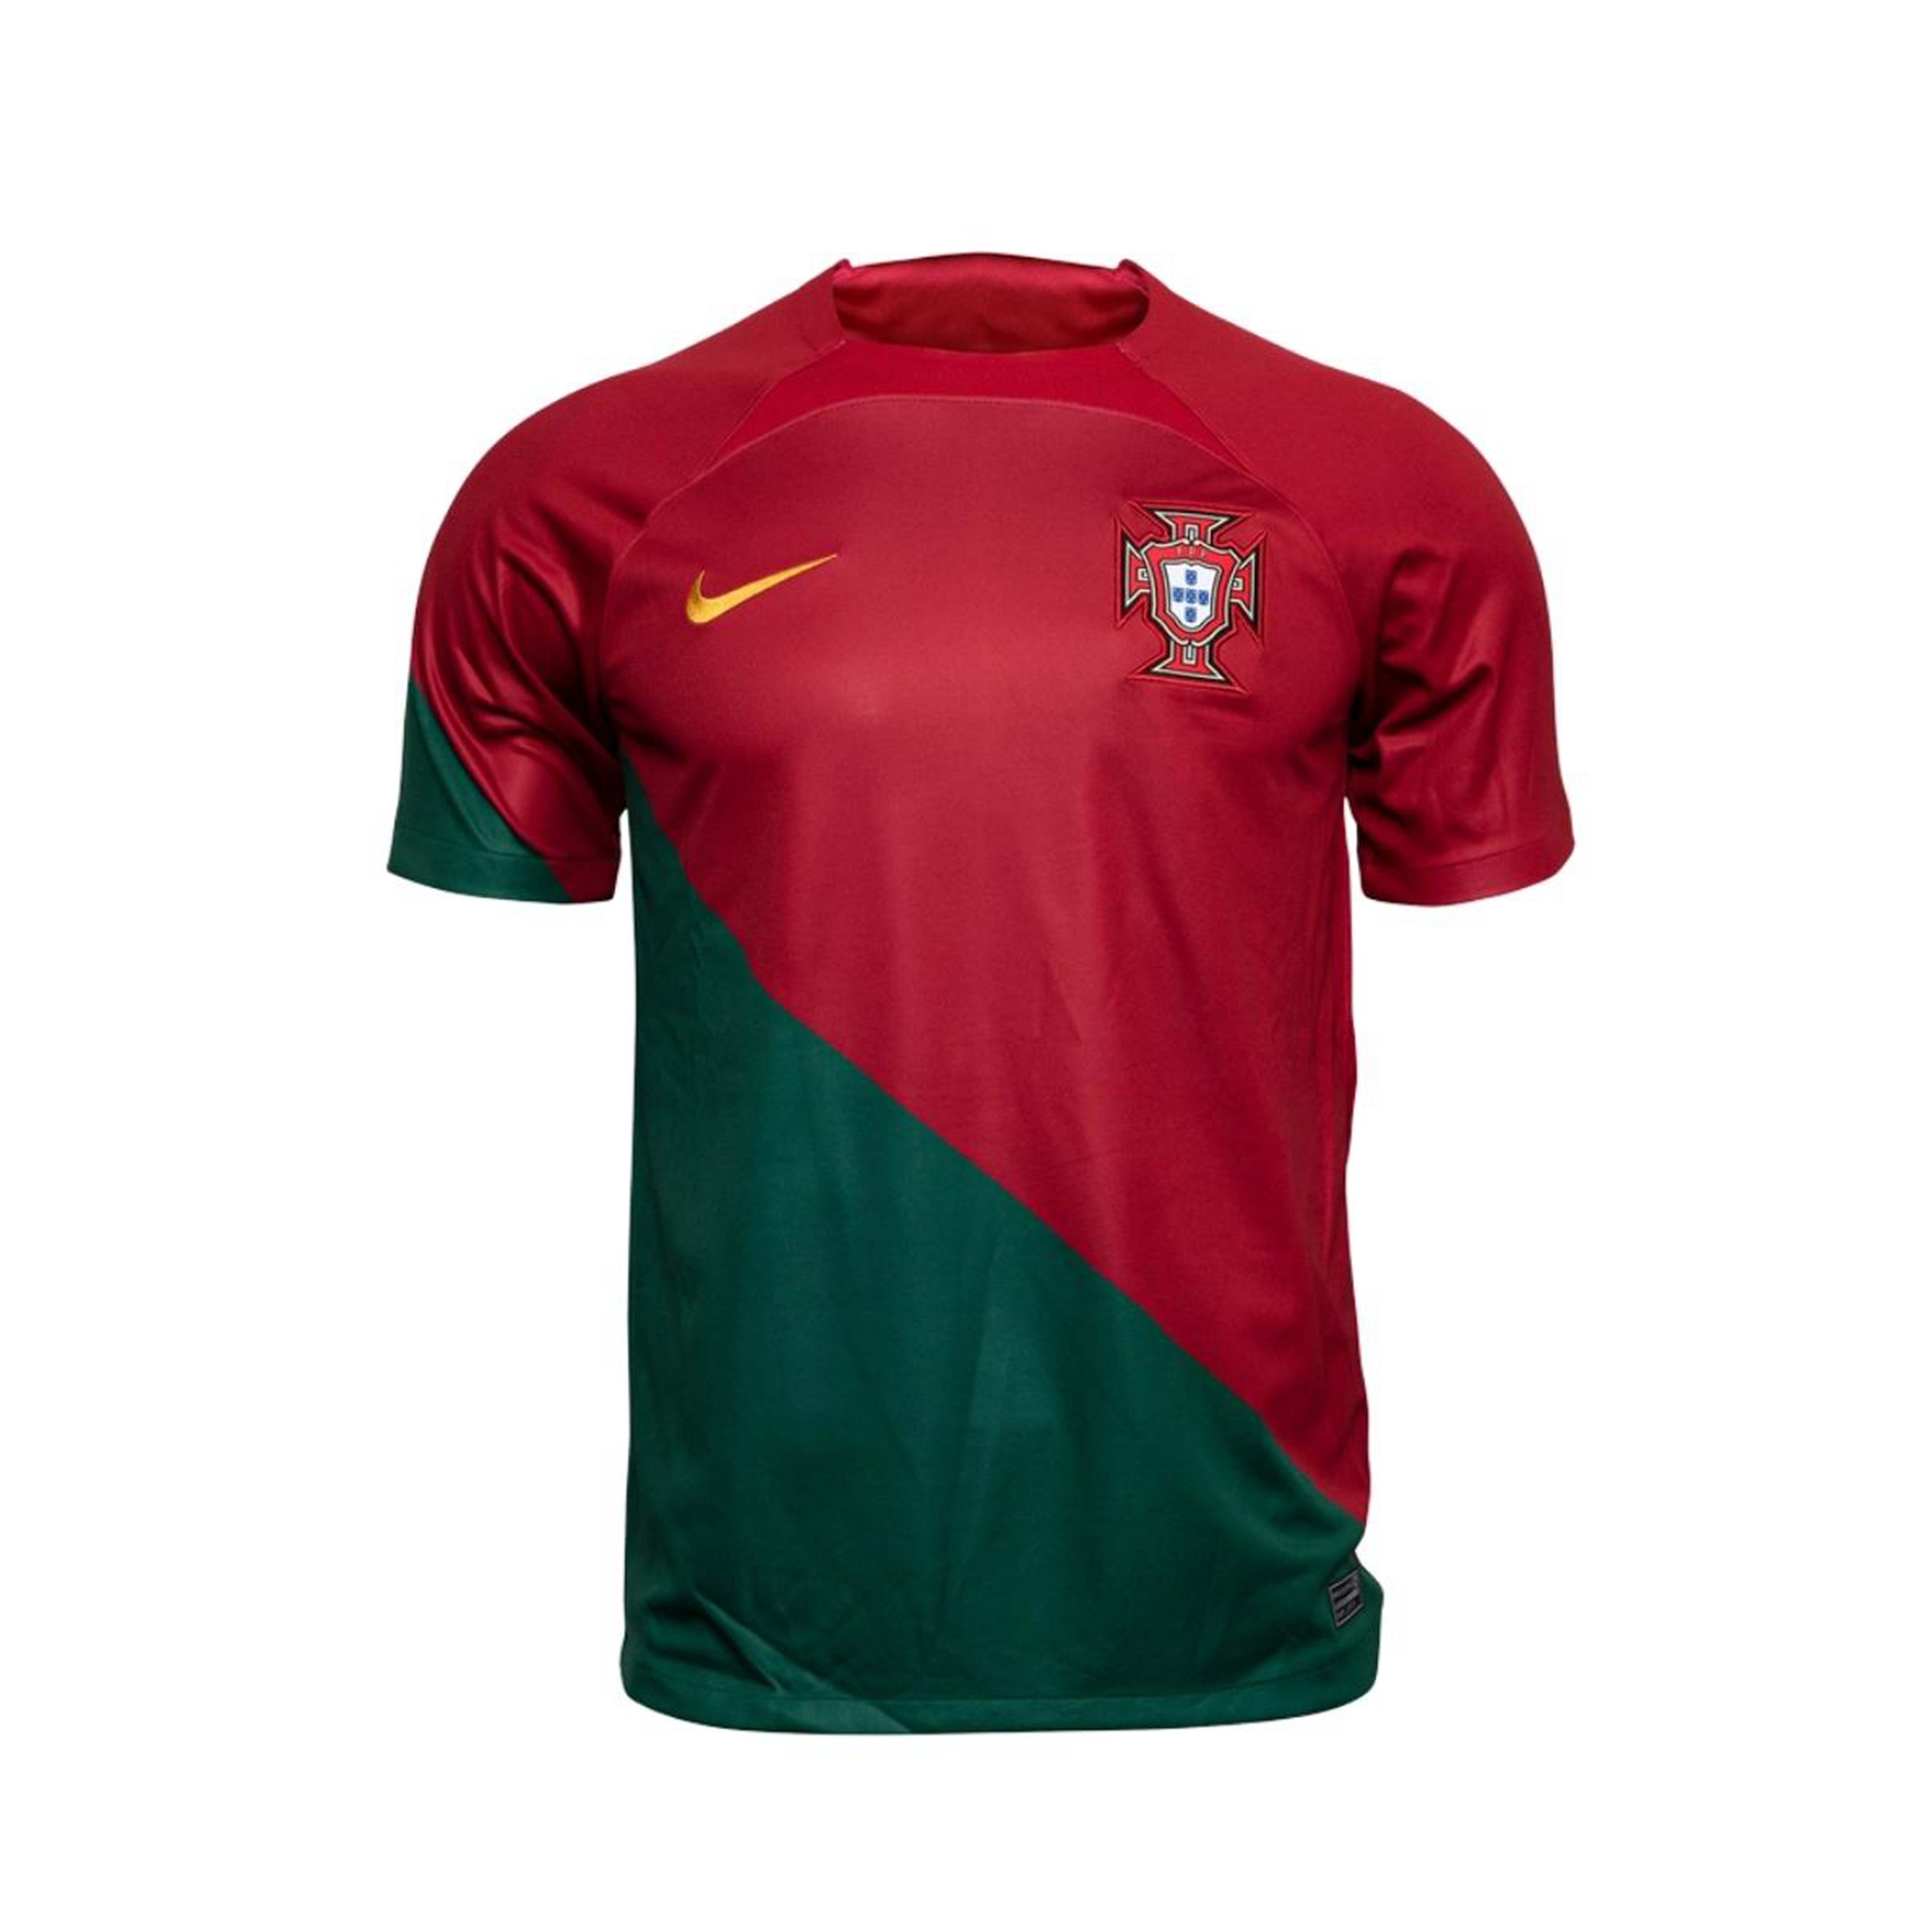 World Cup Jersey - Portugal Home Jersey